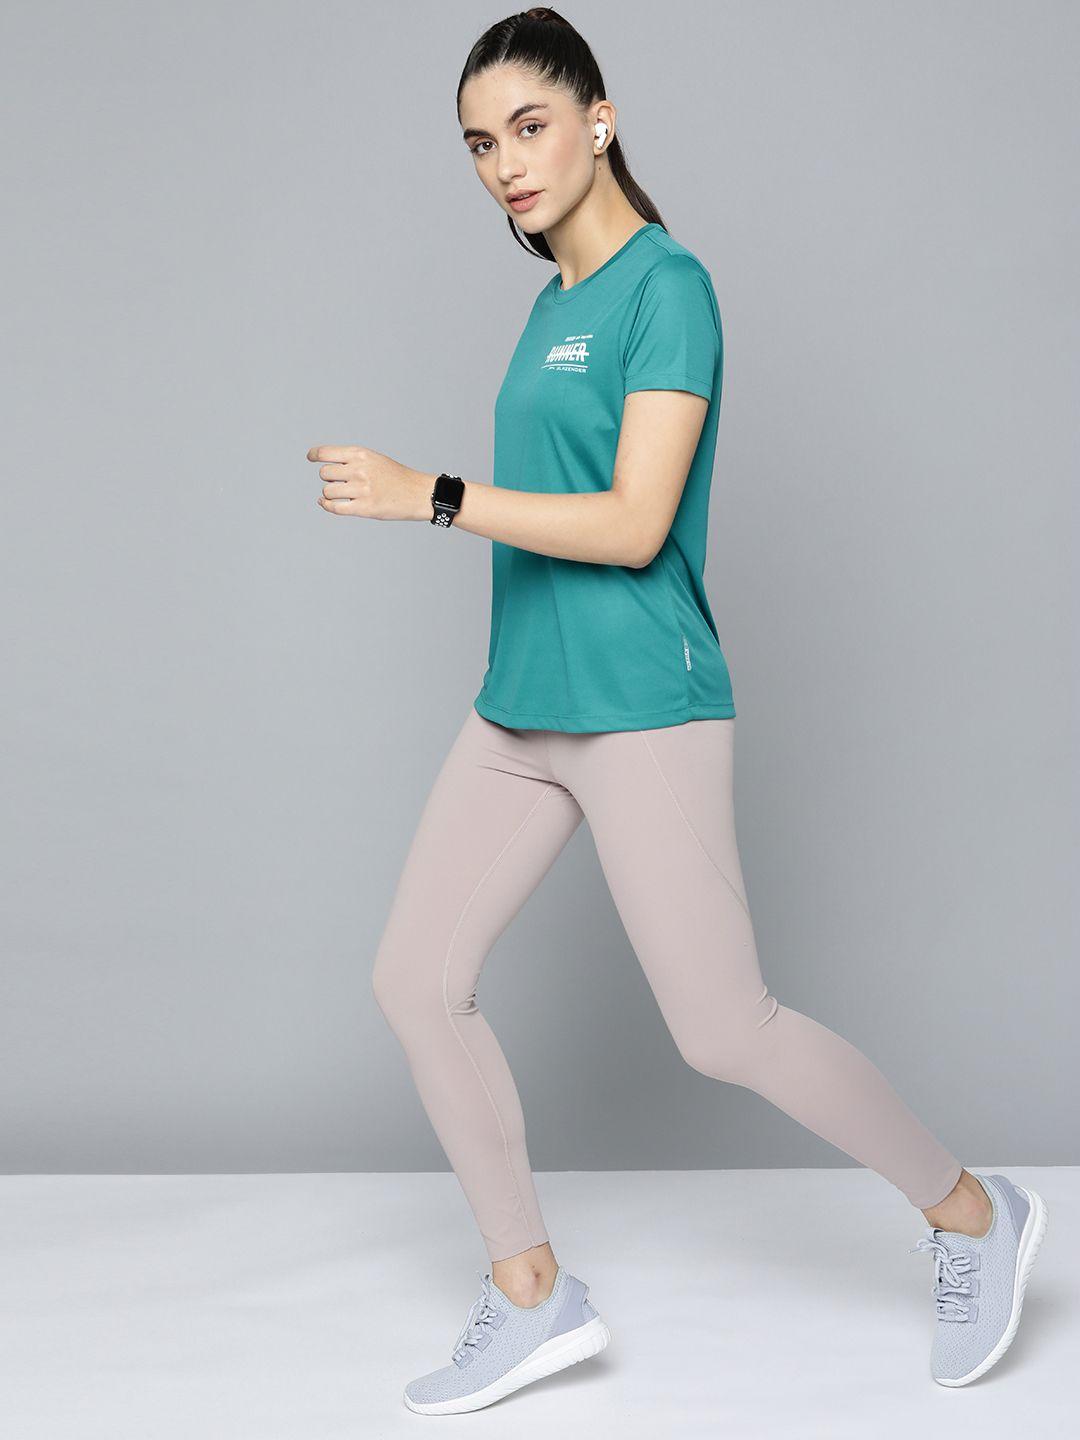 slazenger women teal green typography printed running t-shirt with reflective stripe